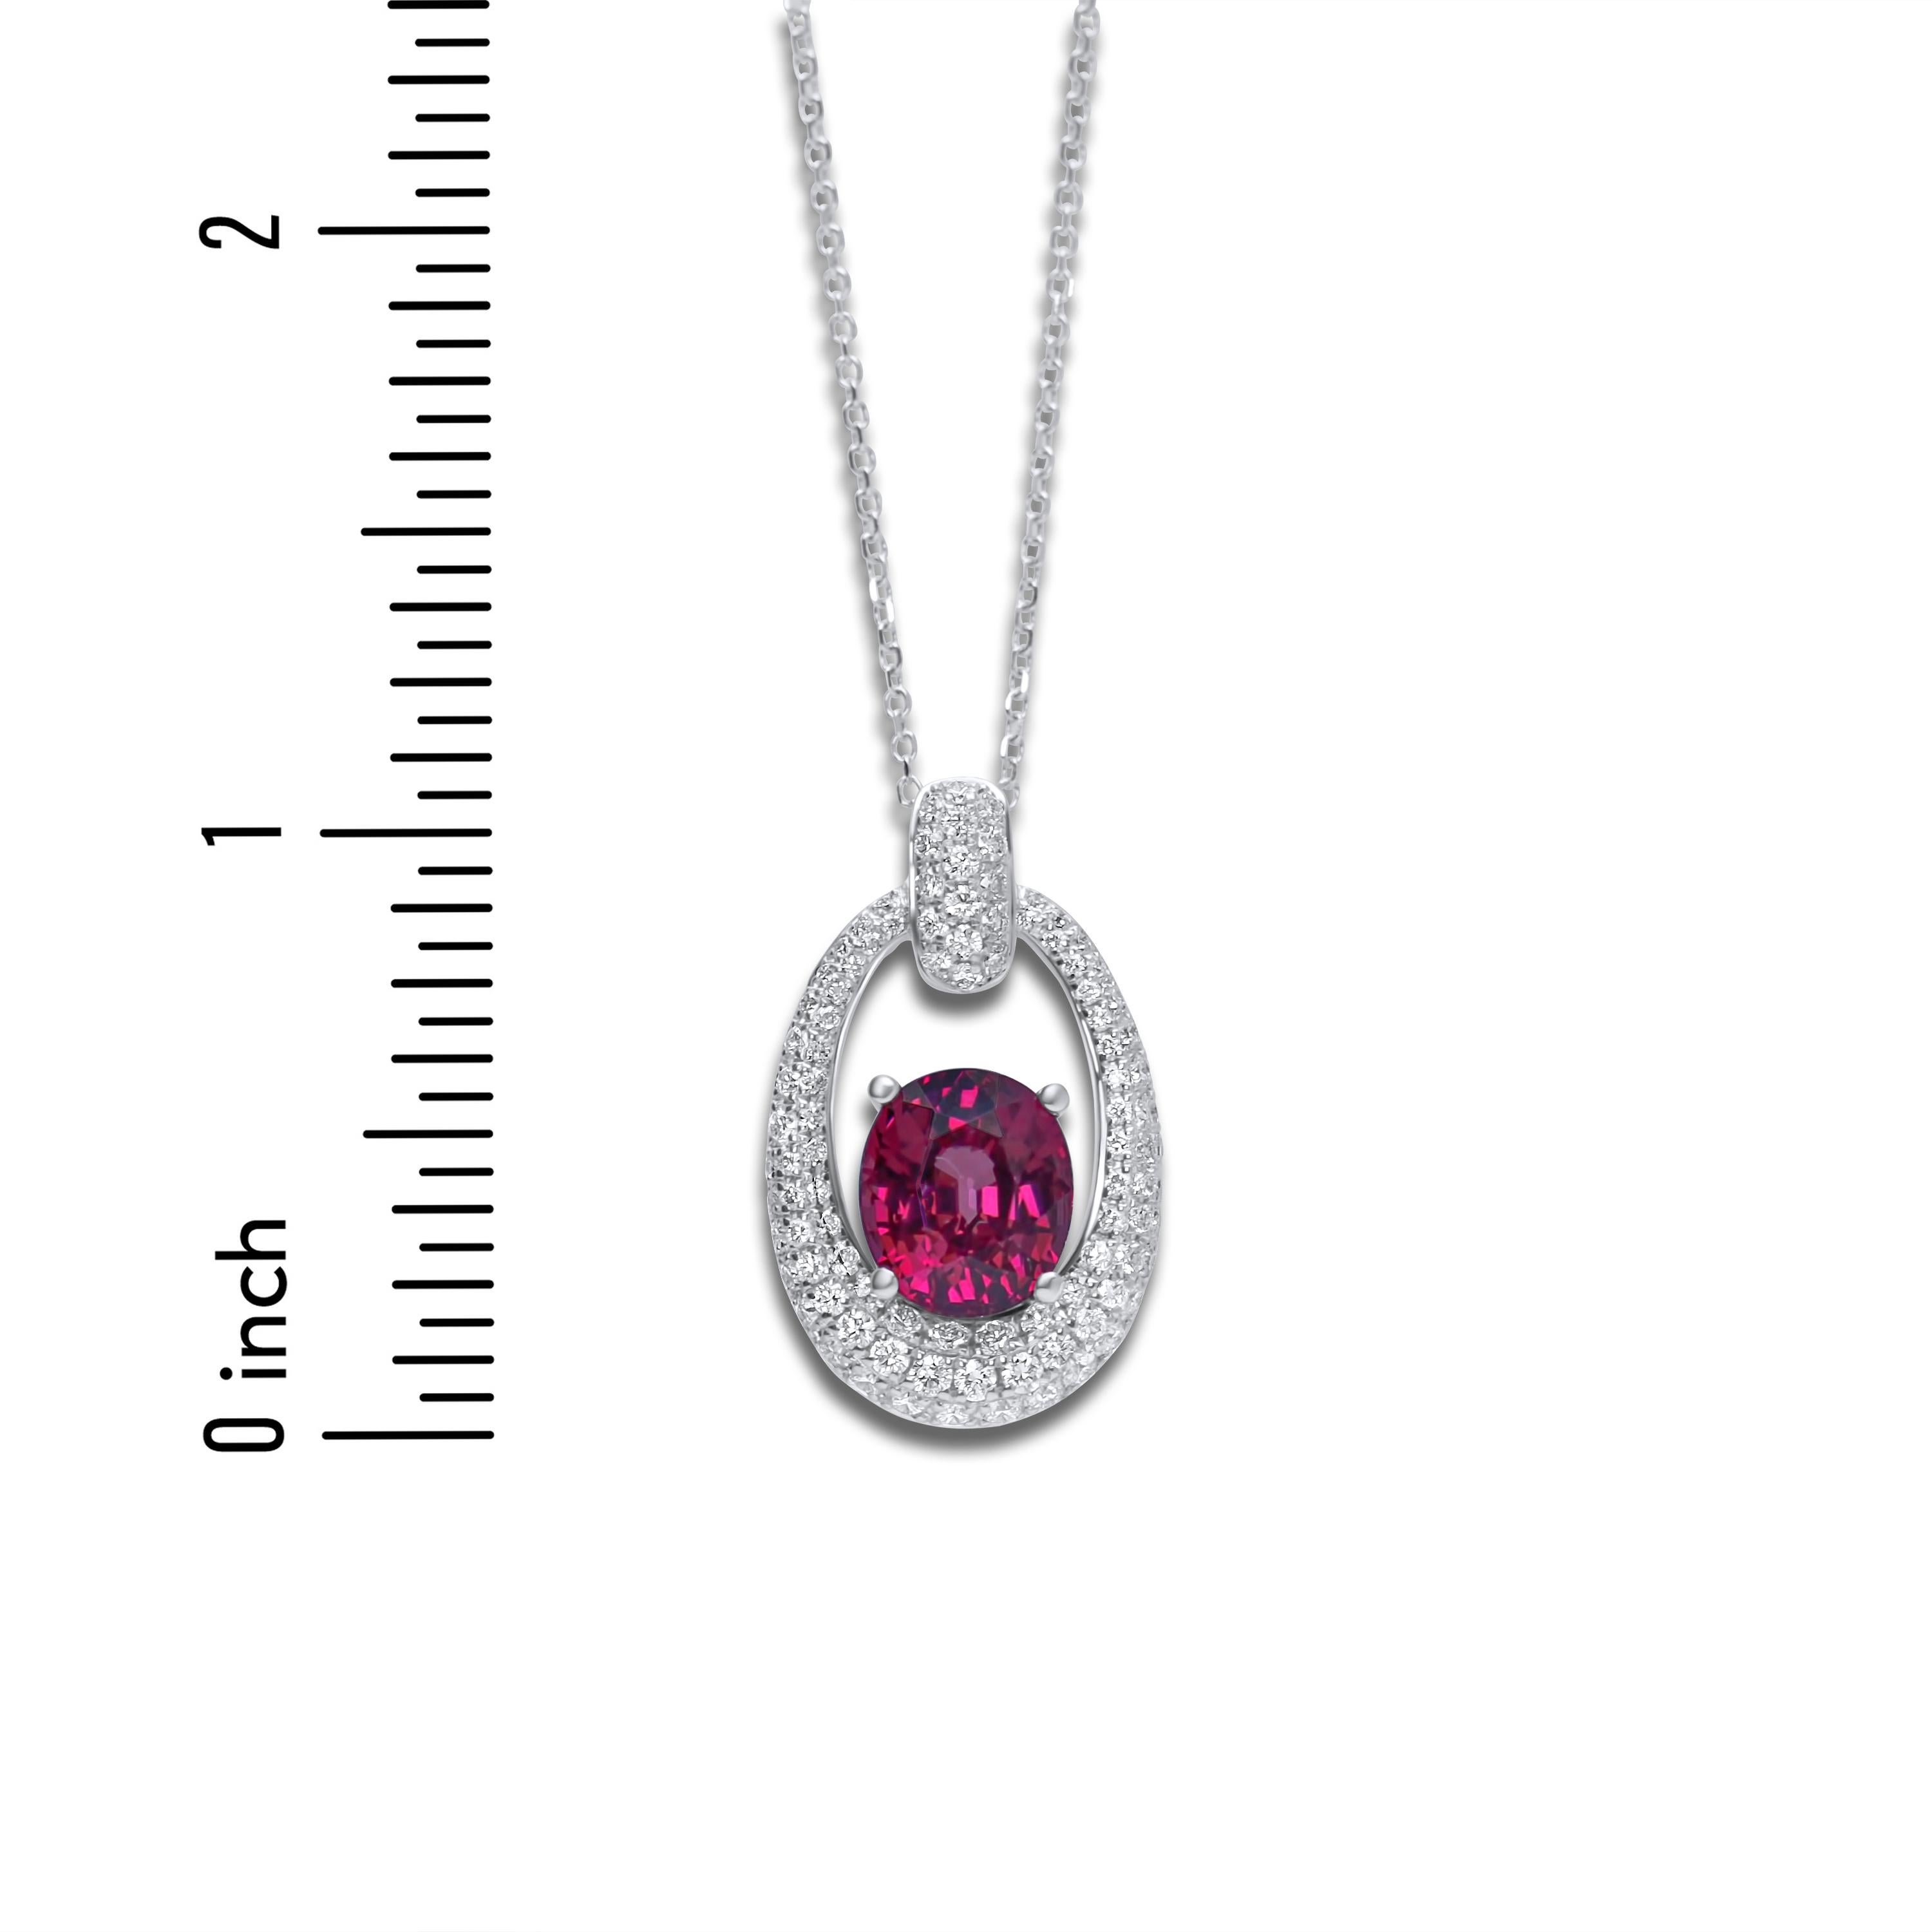 Oval Cut 1.72 Carat Oval Exotic Garnet Pendant with 0.69 Ct Diamonds in 18W Gold ref1505 For Sale